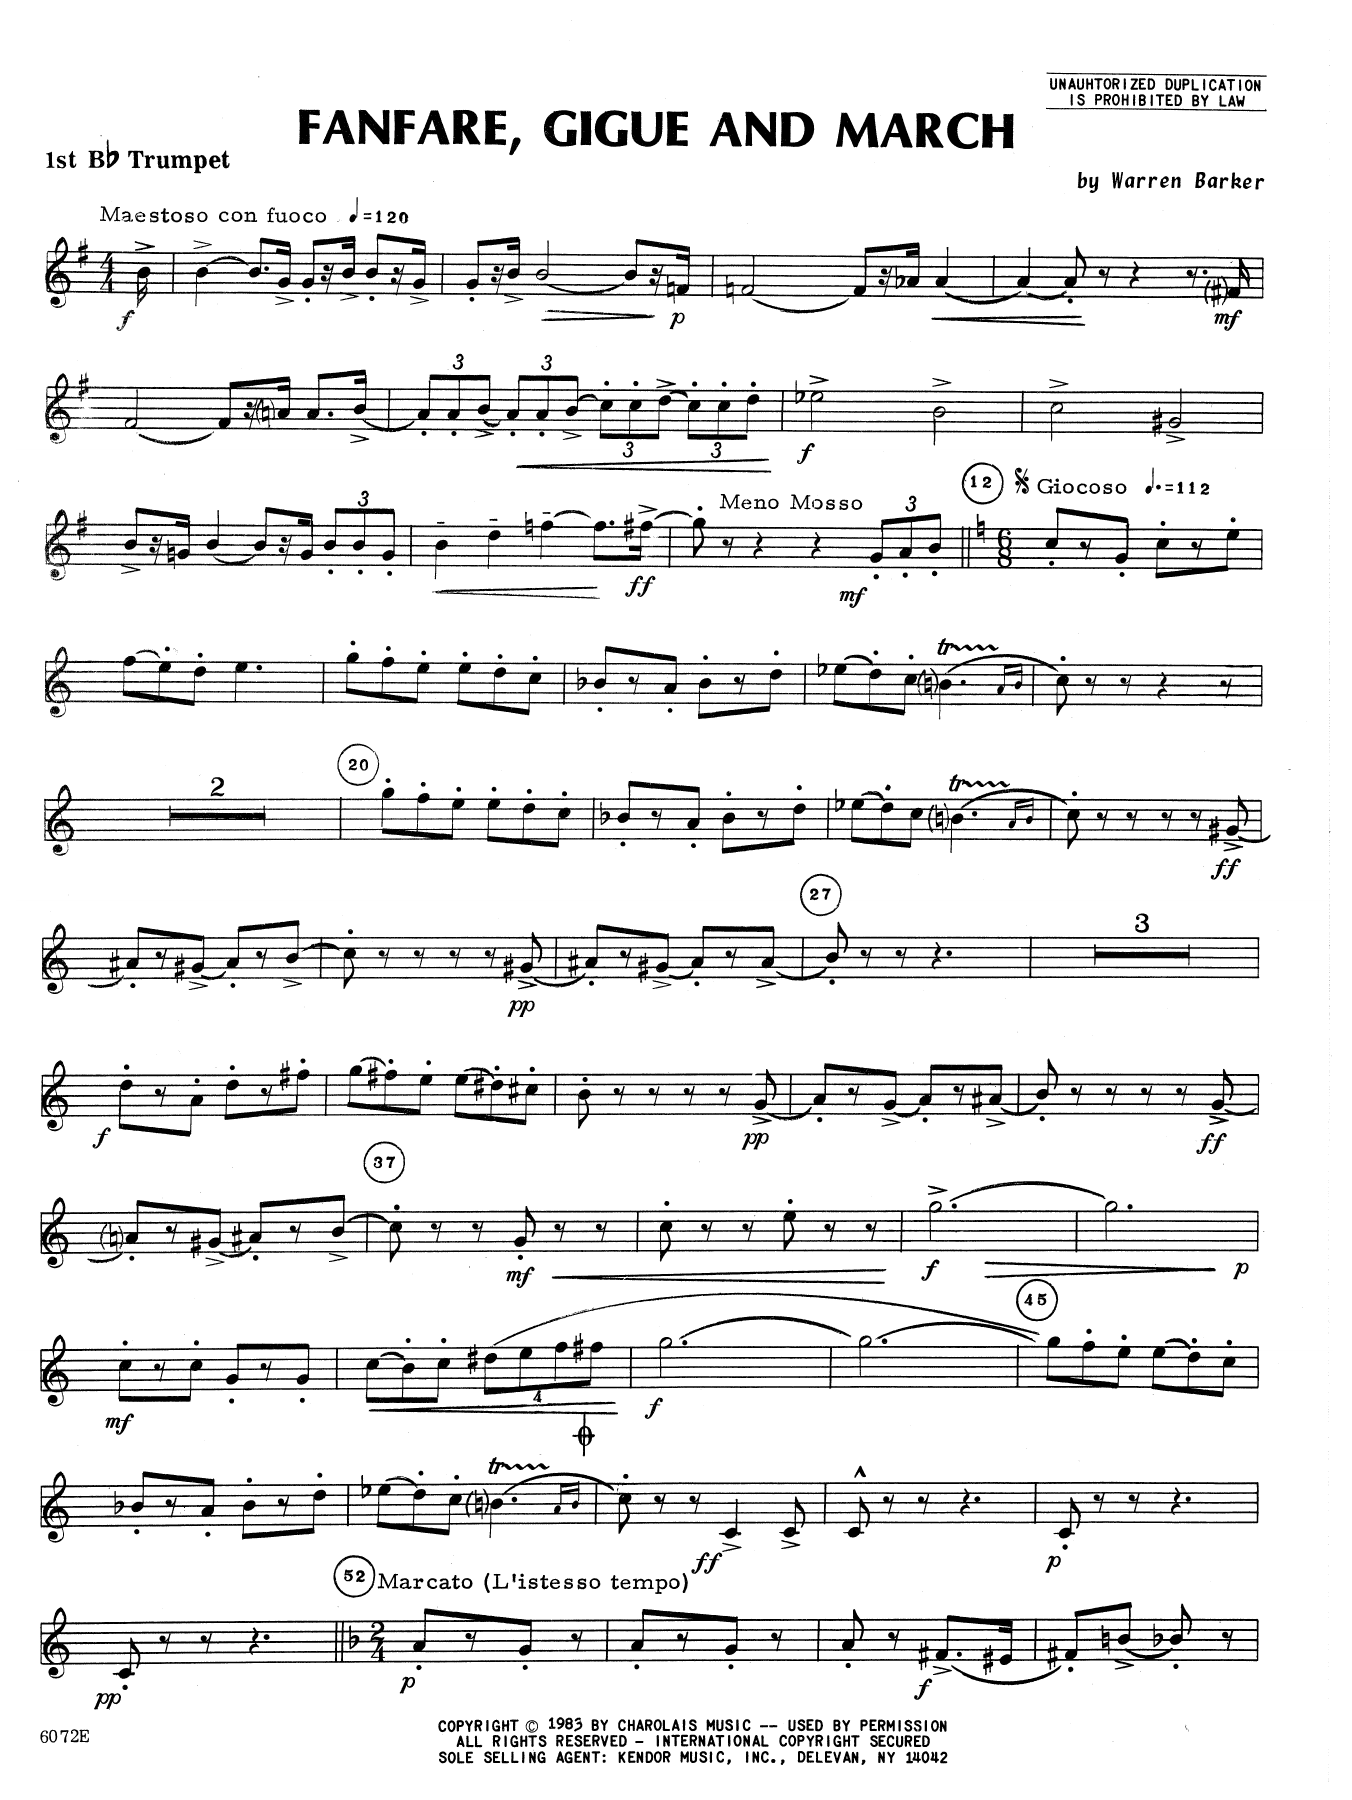 Download Barker Fanfare, Gigue And March - 1st Bb Trump Sheet Music